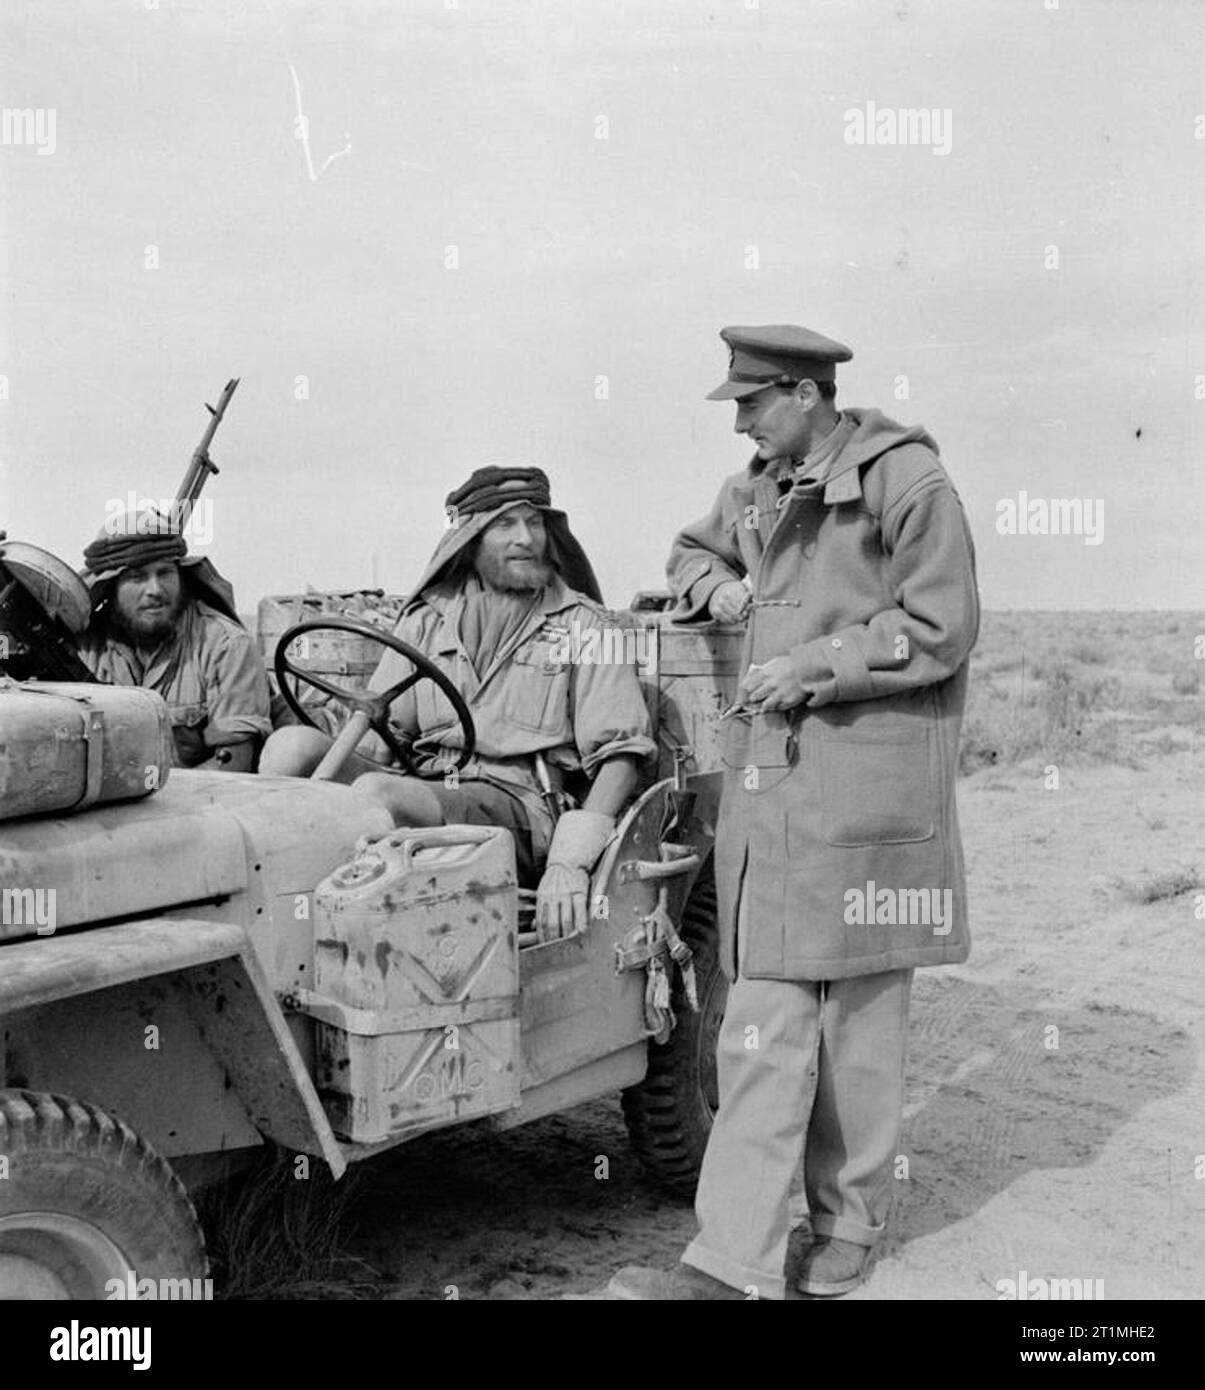 Desert Rats Lieutenant Colonel David Stirling officer commanding the SAS in the Middle East talking to Patrol Commander Lieutenant McDonald. Stock Photo